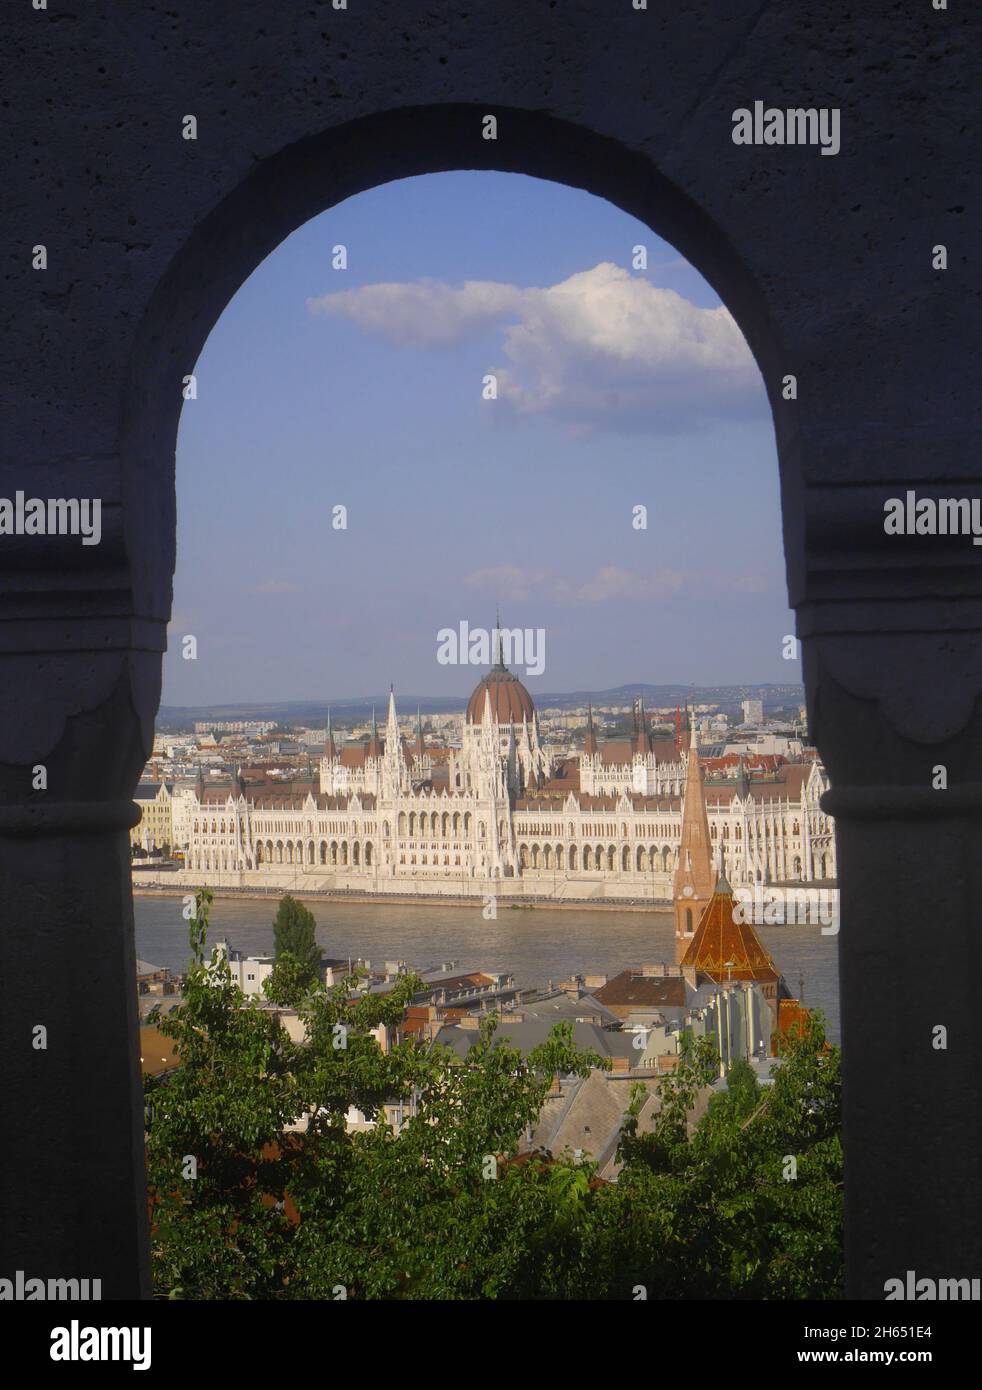 Hungarian Parliament from the halaszbastya (Fisherman’s Bastion), across the River Danube, Budapest, Hungary. Budapest is a UNESCO World Heritage site Stock Photo